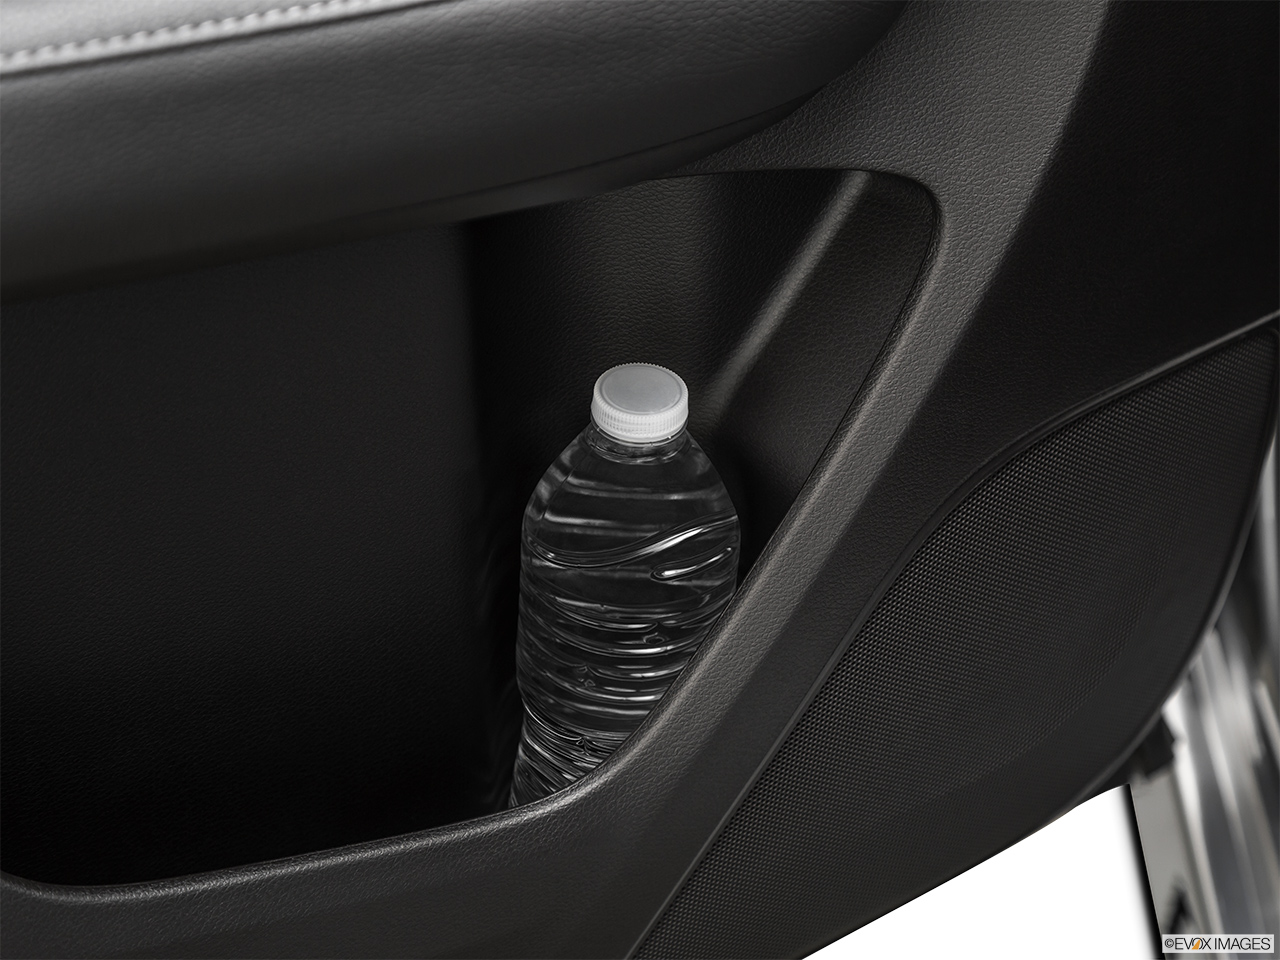 2020 Acura MDX Base Second row side cup holder with coffee prop, or second row door cup holder with water bottle. 